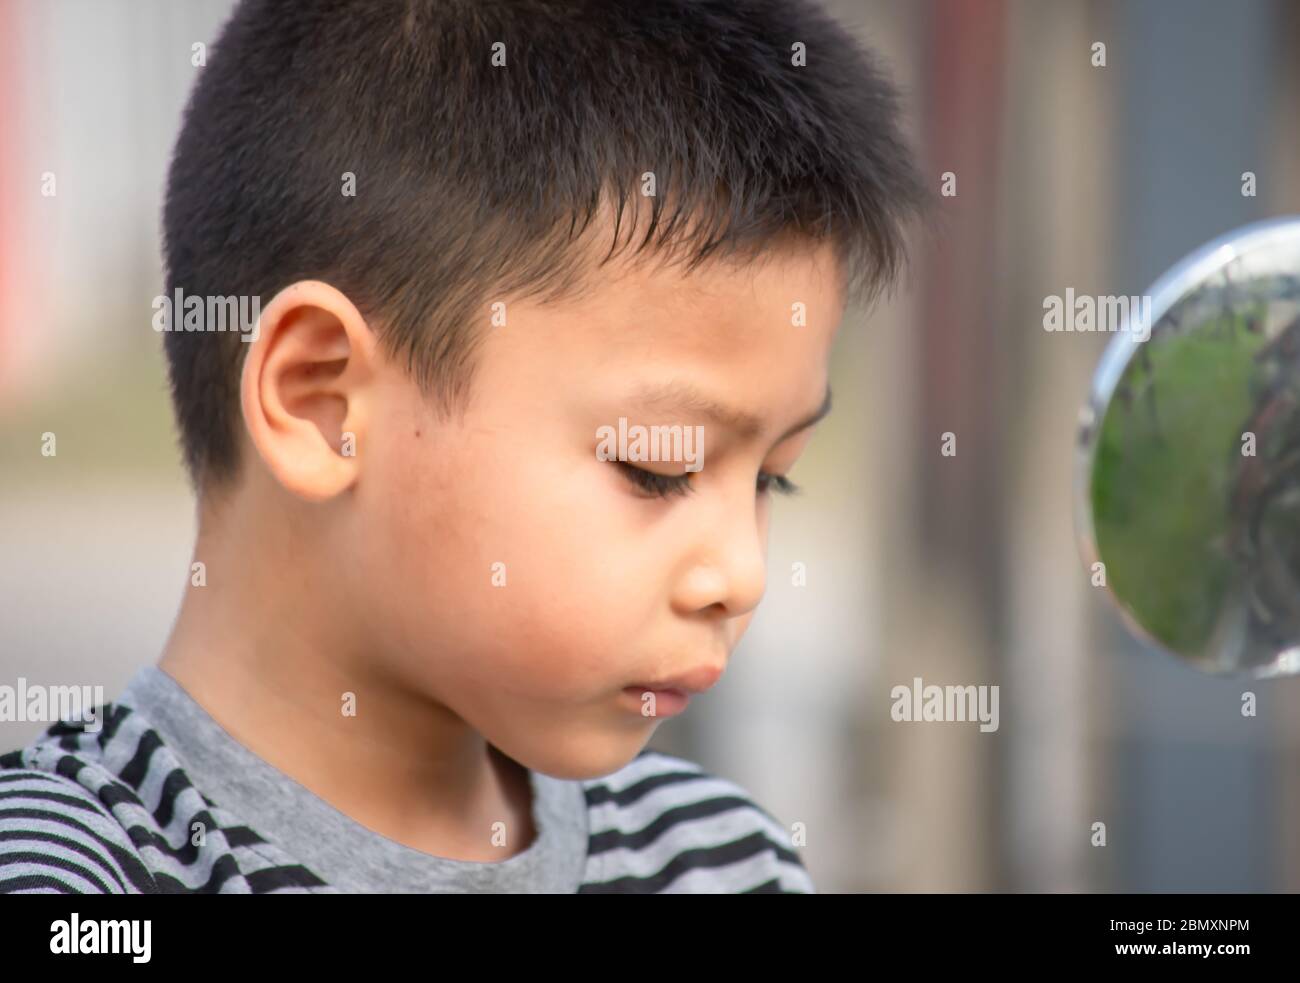 Portrait of Asian boy Tired expression Stock Photo